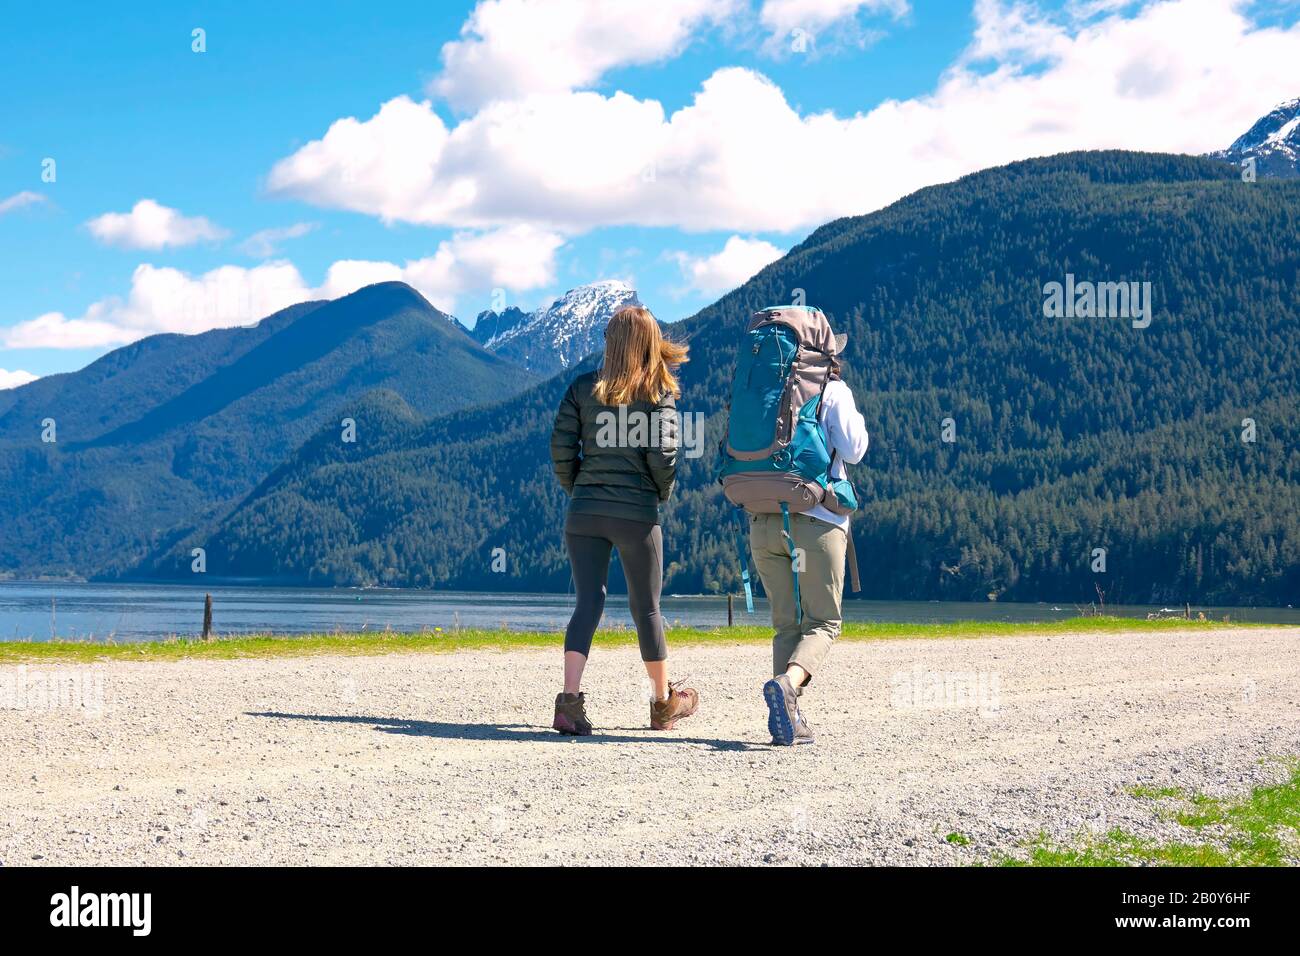 Two young women walking on gravel road beside a lake with mountains in the background.  Stock photo. Stock Photo